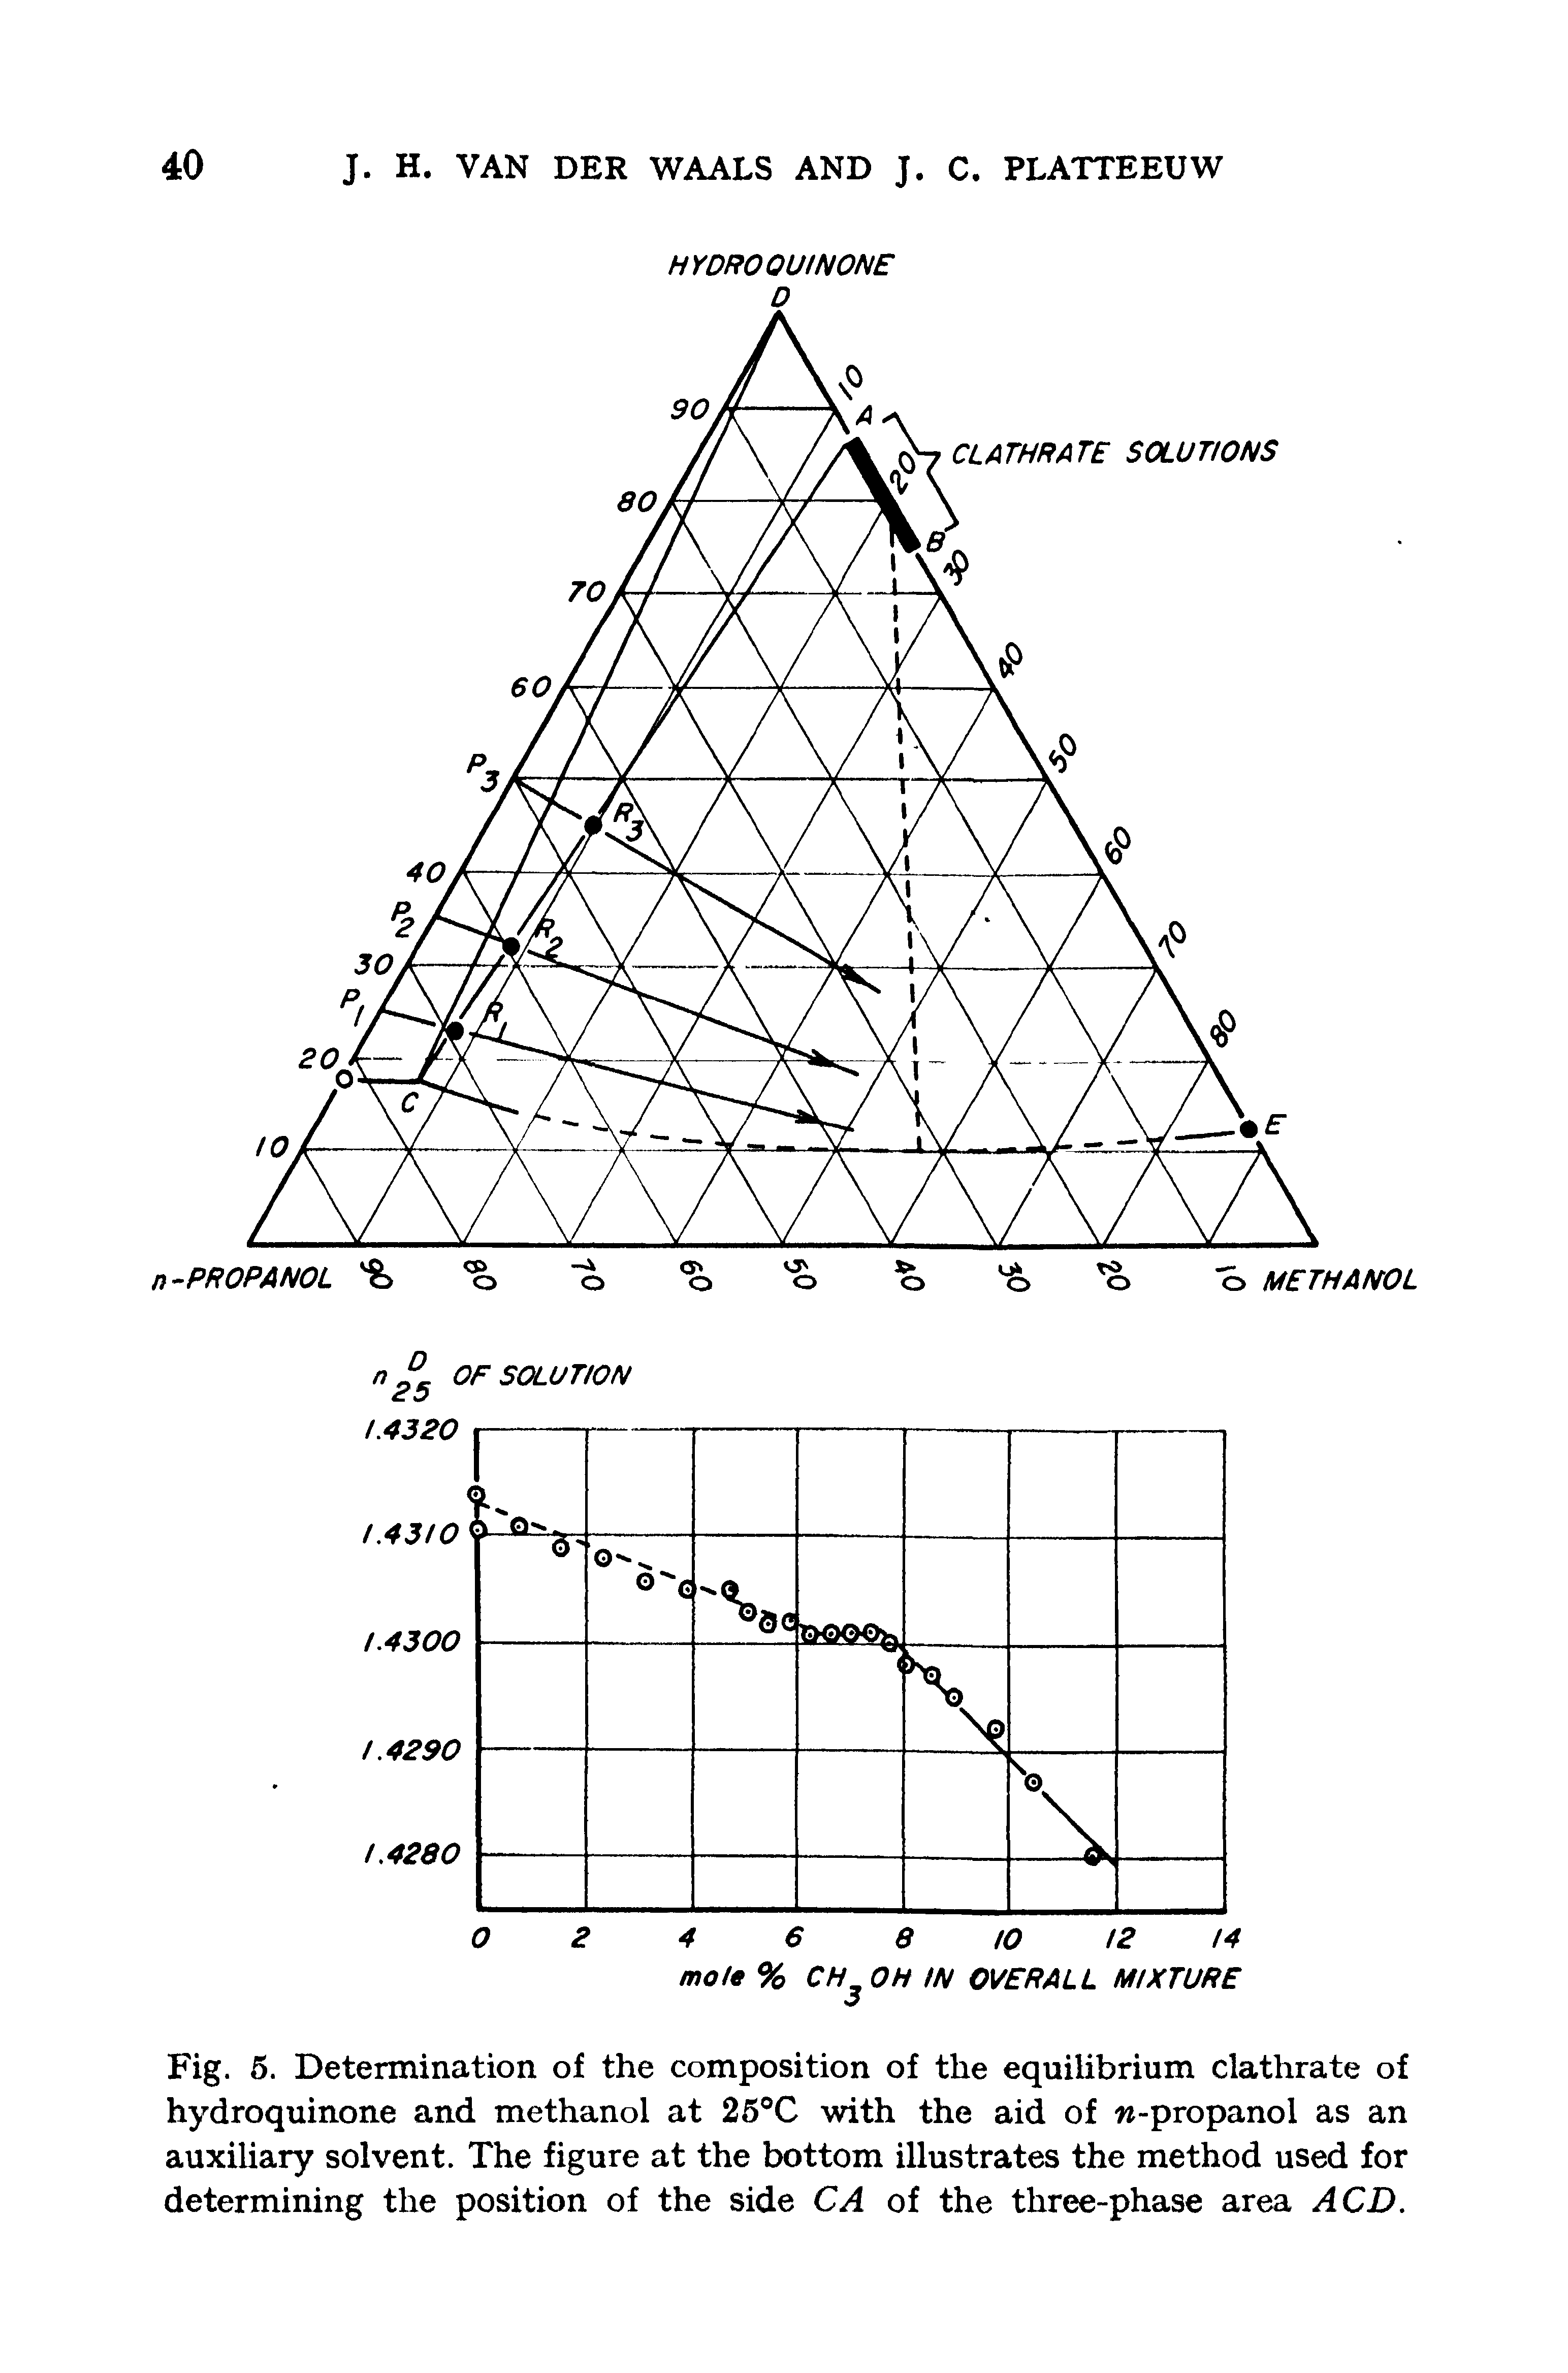 Fig. 5. Determination of the composition of the equilibrium clathrate of hydroquinone and methanol at 25°C with the aid of -propanol as an auxiliary solvent. The figure at the bottom illustrates the method used for determining the position of the side CA of the three-phase area A CD.